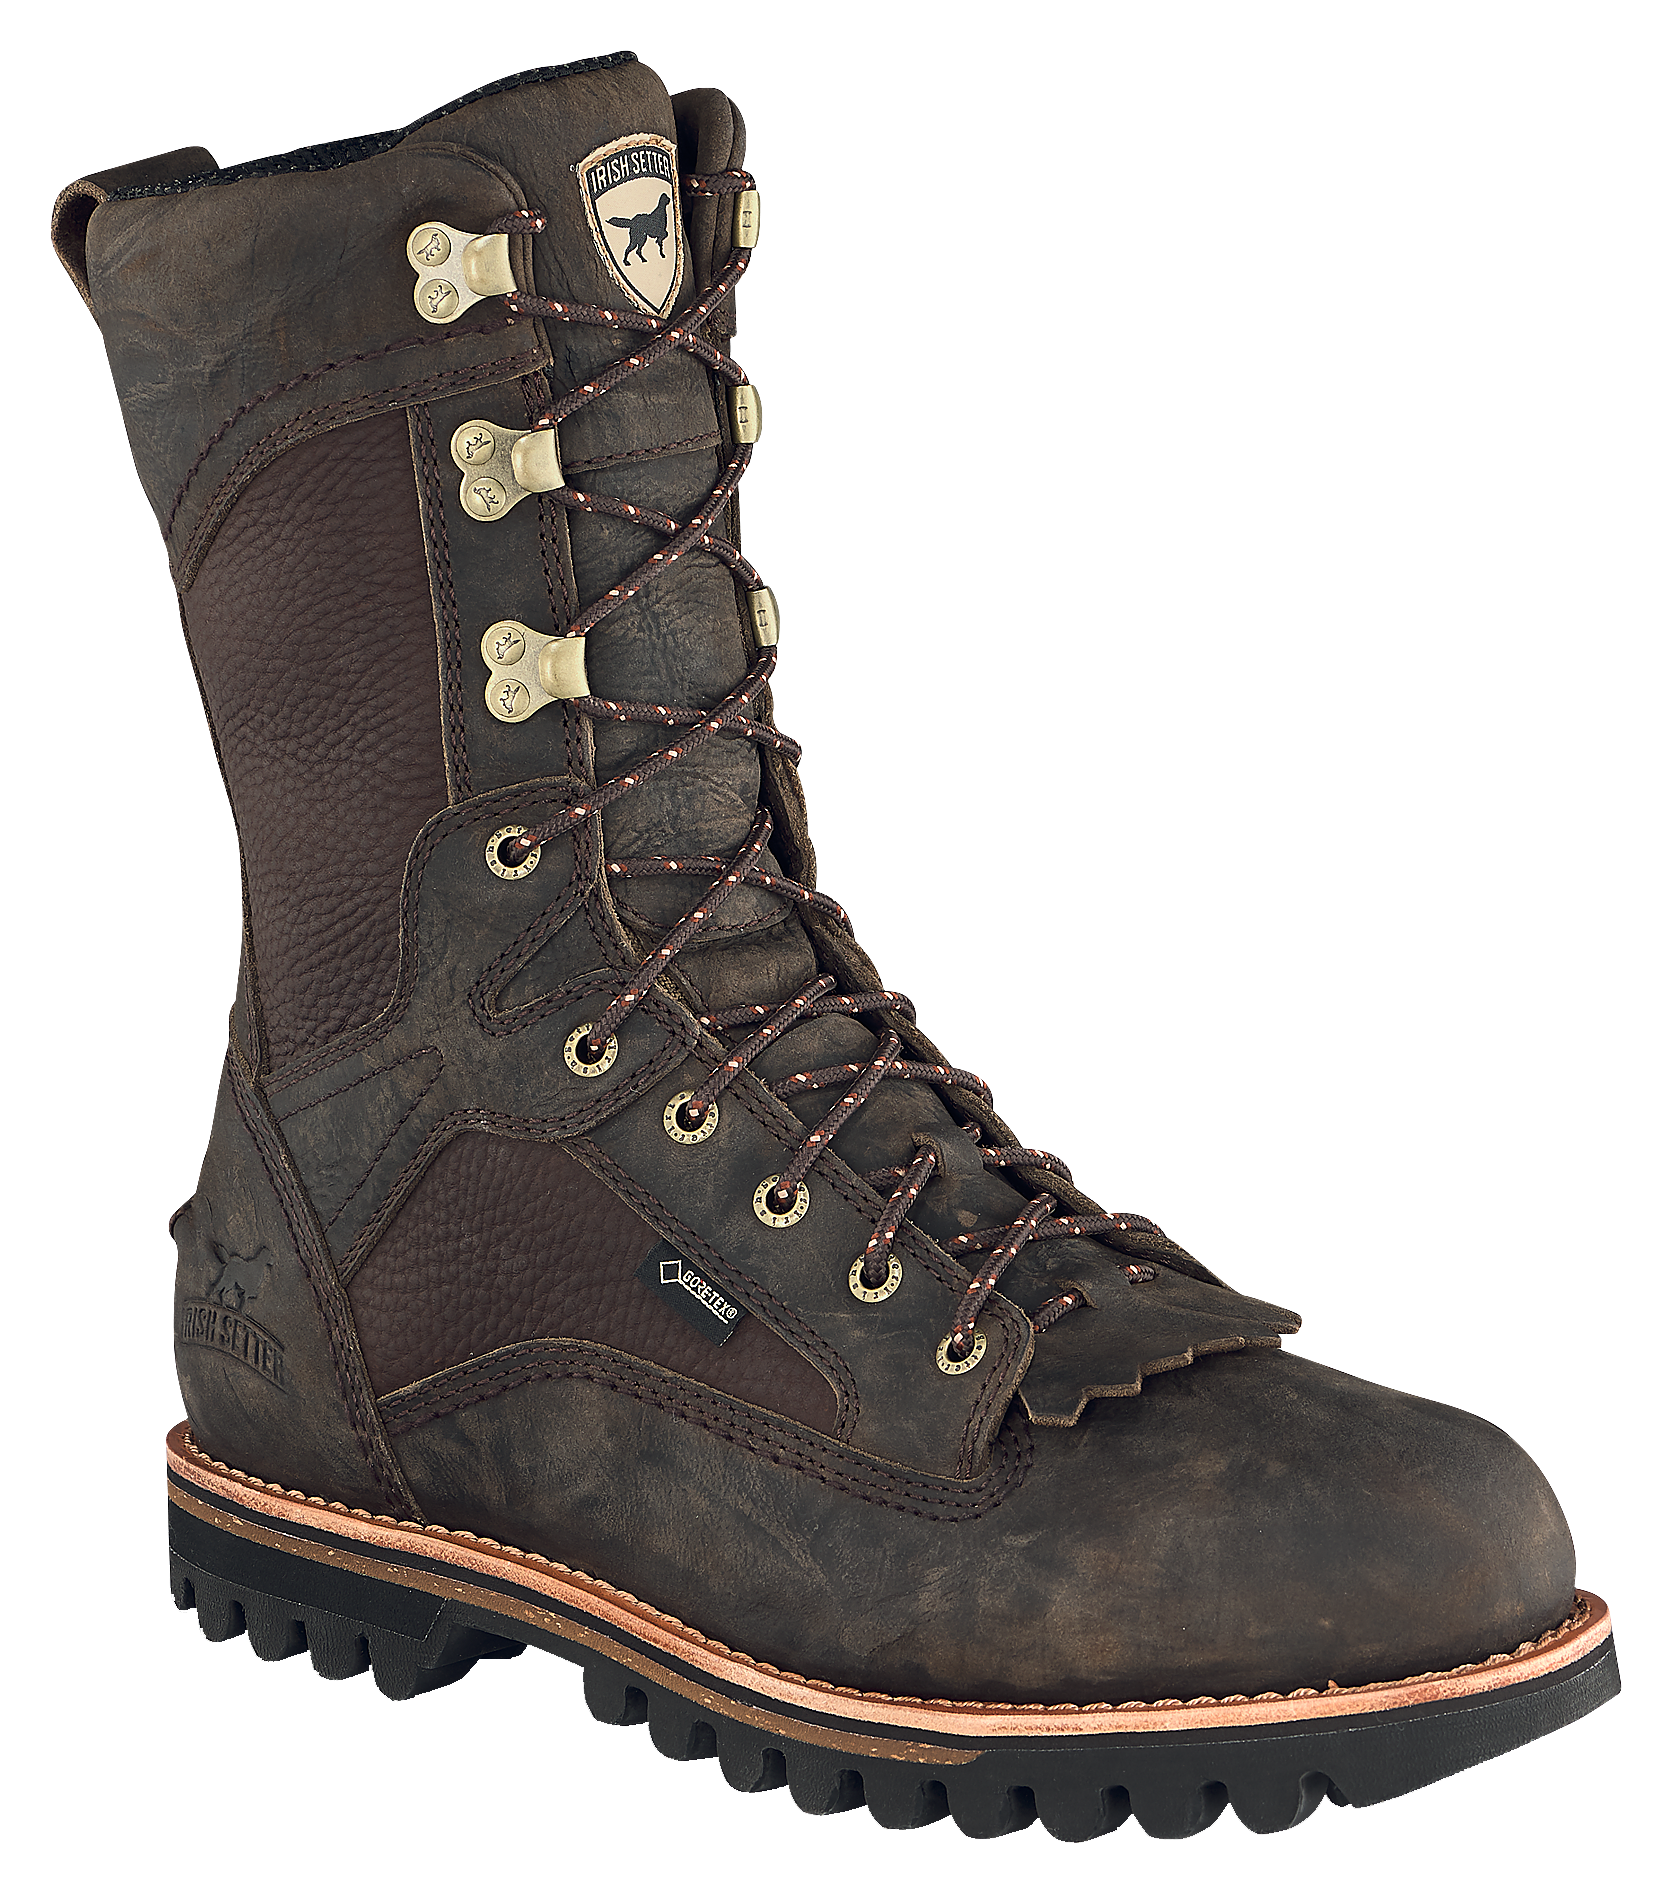 Irish Setter Elk Tracker GORE-TEX Insulated Hunting Boots for Men - Brown - 10W